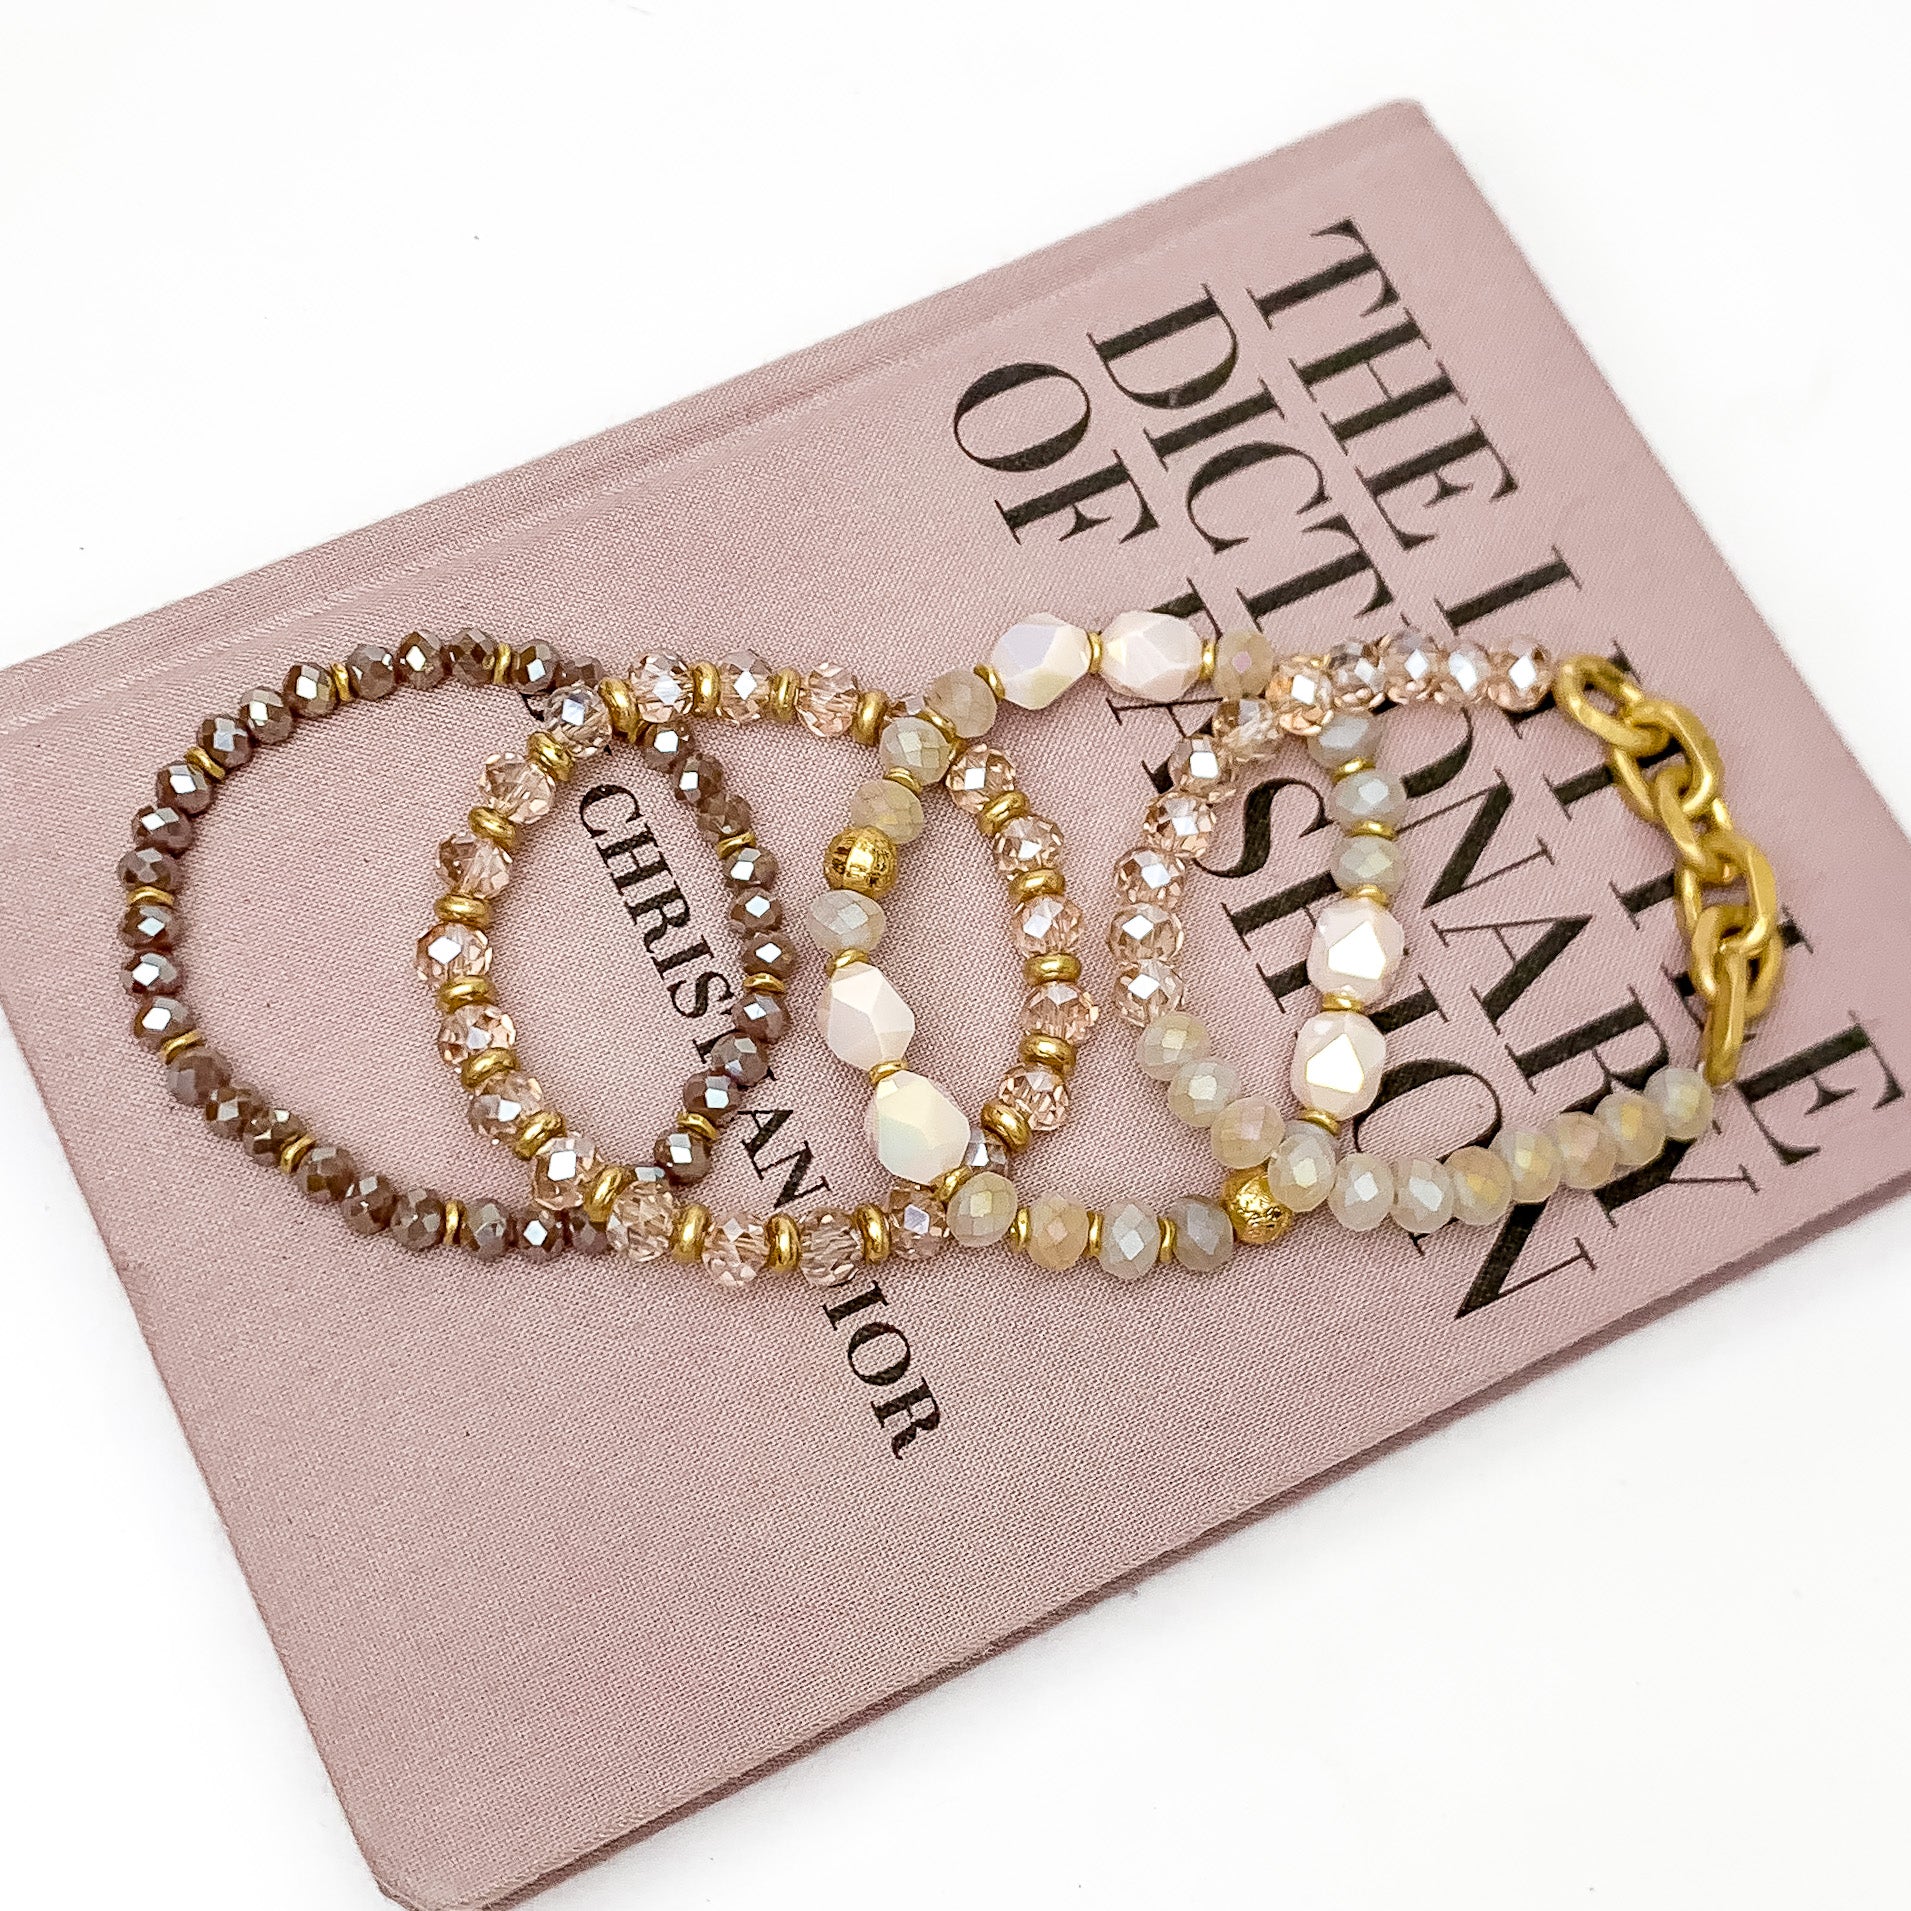 Set of Four | Glorious Gold Crystal Beaded Bracelet Set in Mauve Purple. Pictured laying on a closed book. The book is on a white background.